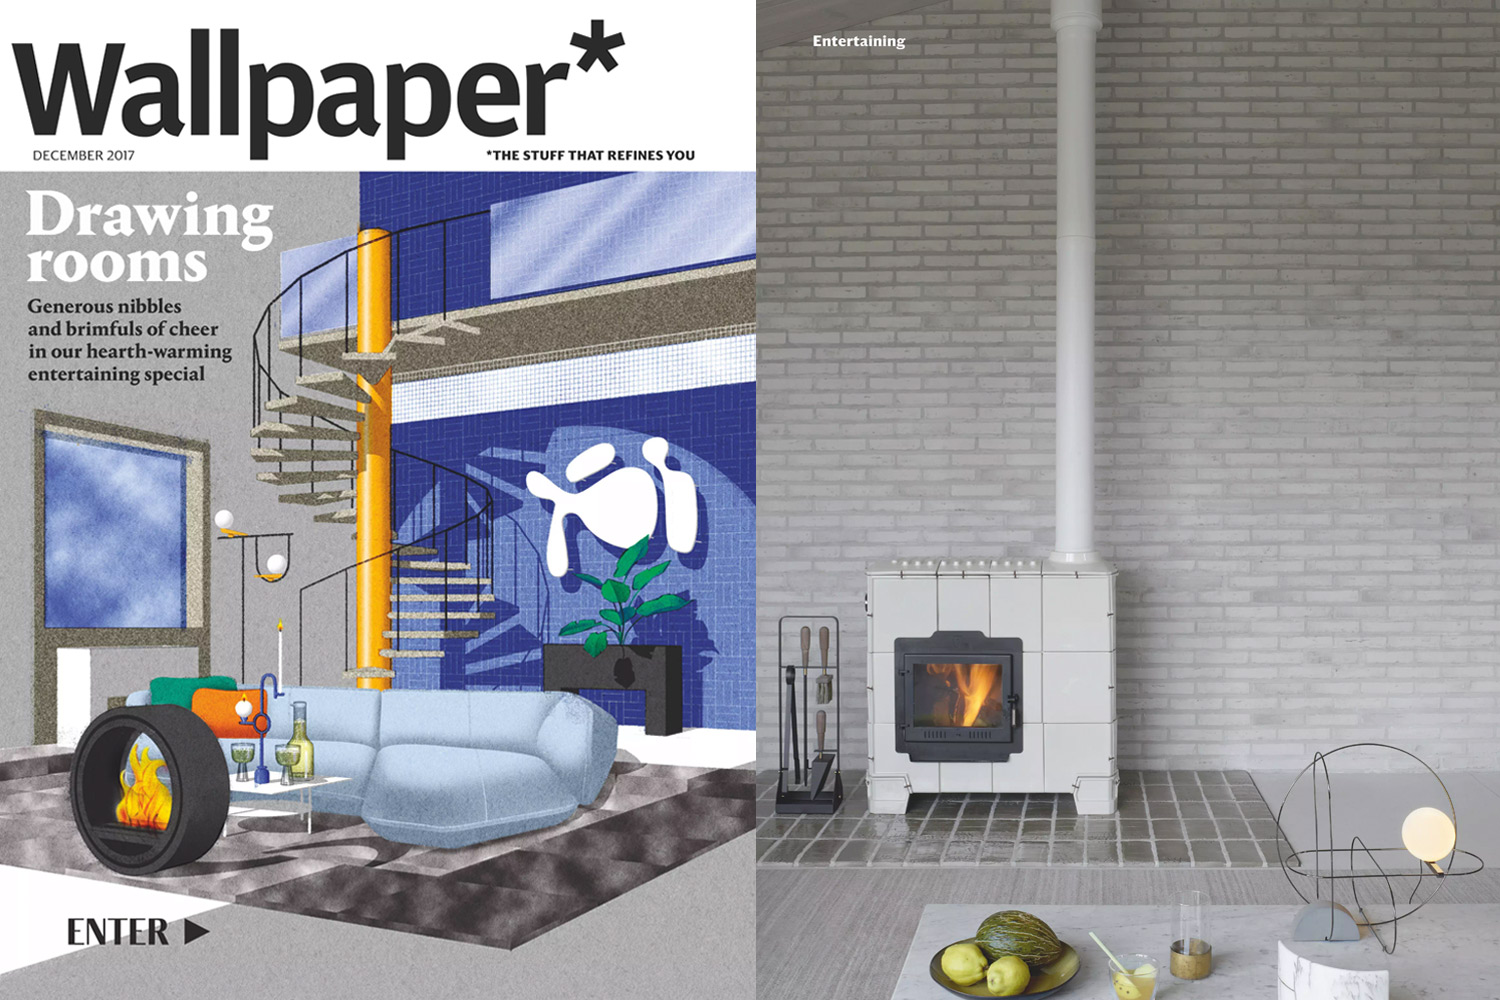 On the left a screenshot of the December 2017 issue of Wallpaper Magazine. On the right an image of a white tiled woodstove, beside it is a Noir Emma Companion Set.